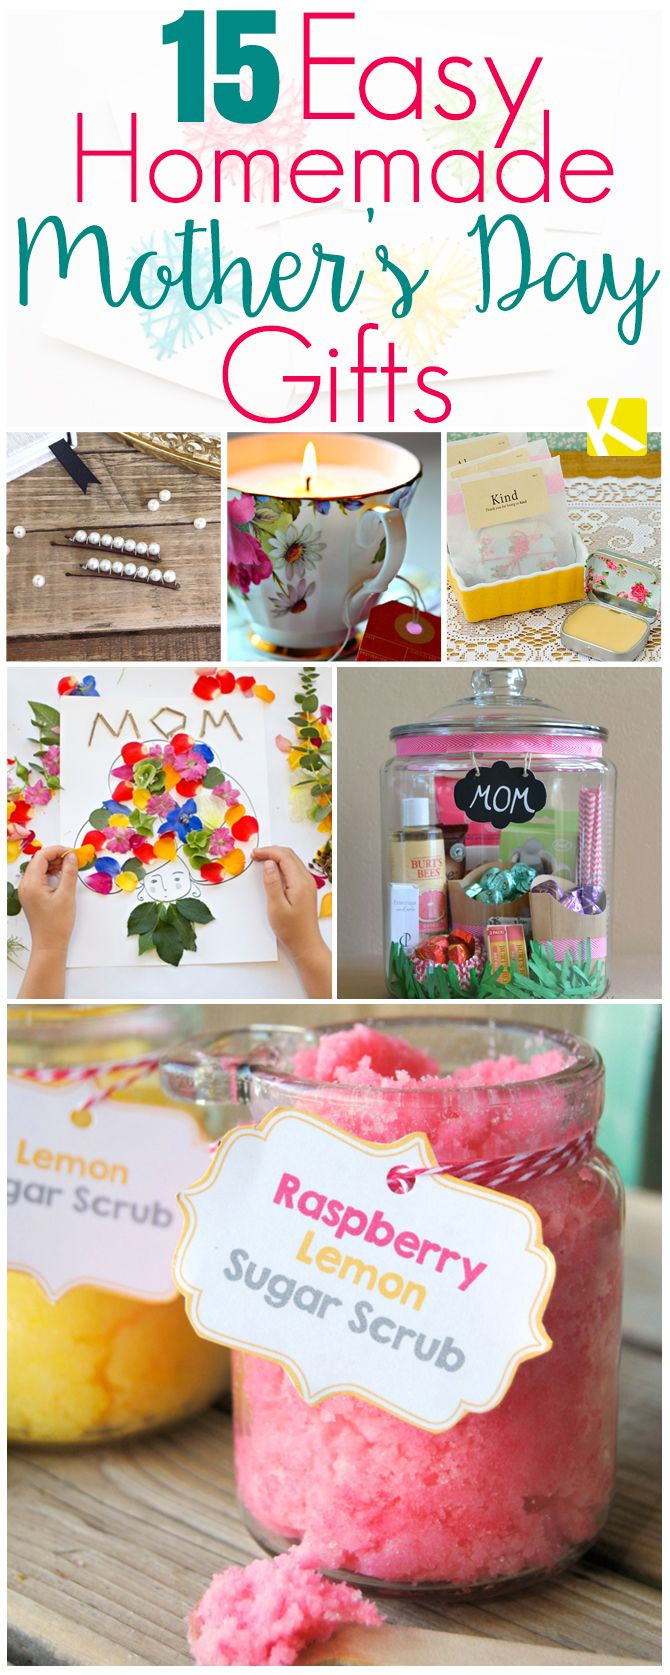 Toddler Mothers Day Gifts
 15 Mother’s Day Gifts That Are Ridiculously Easy to Make